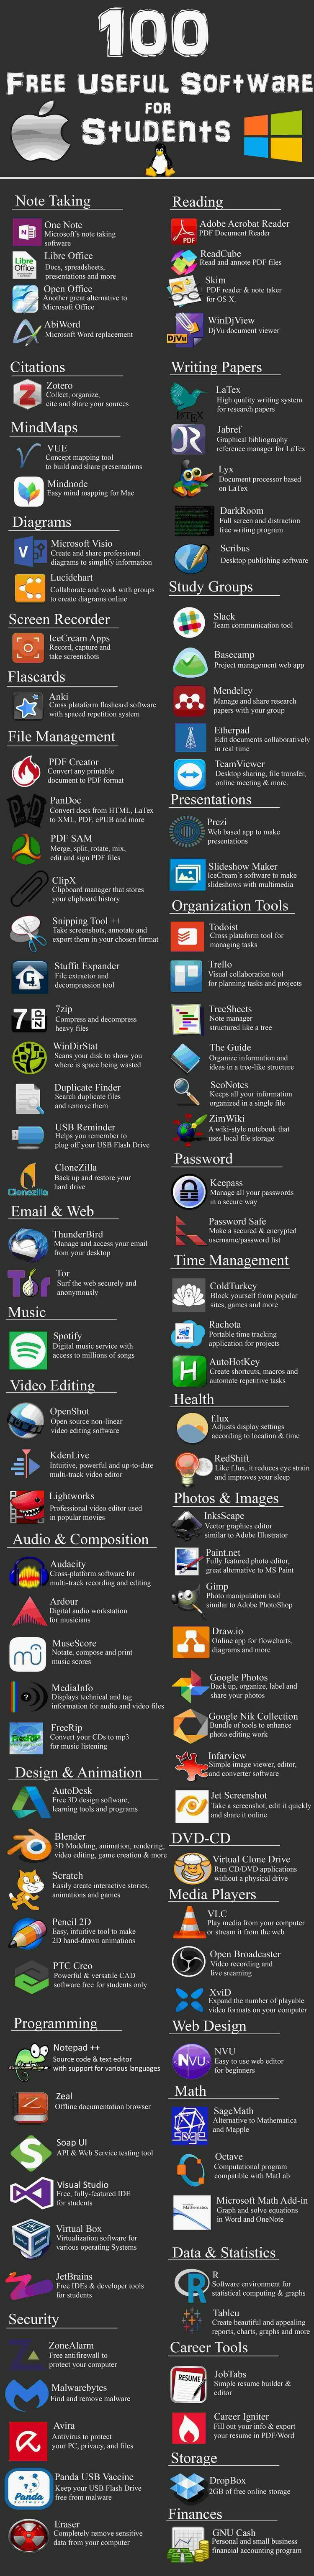 useful software for students infographic